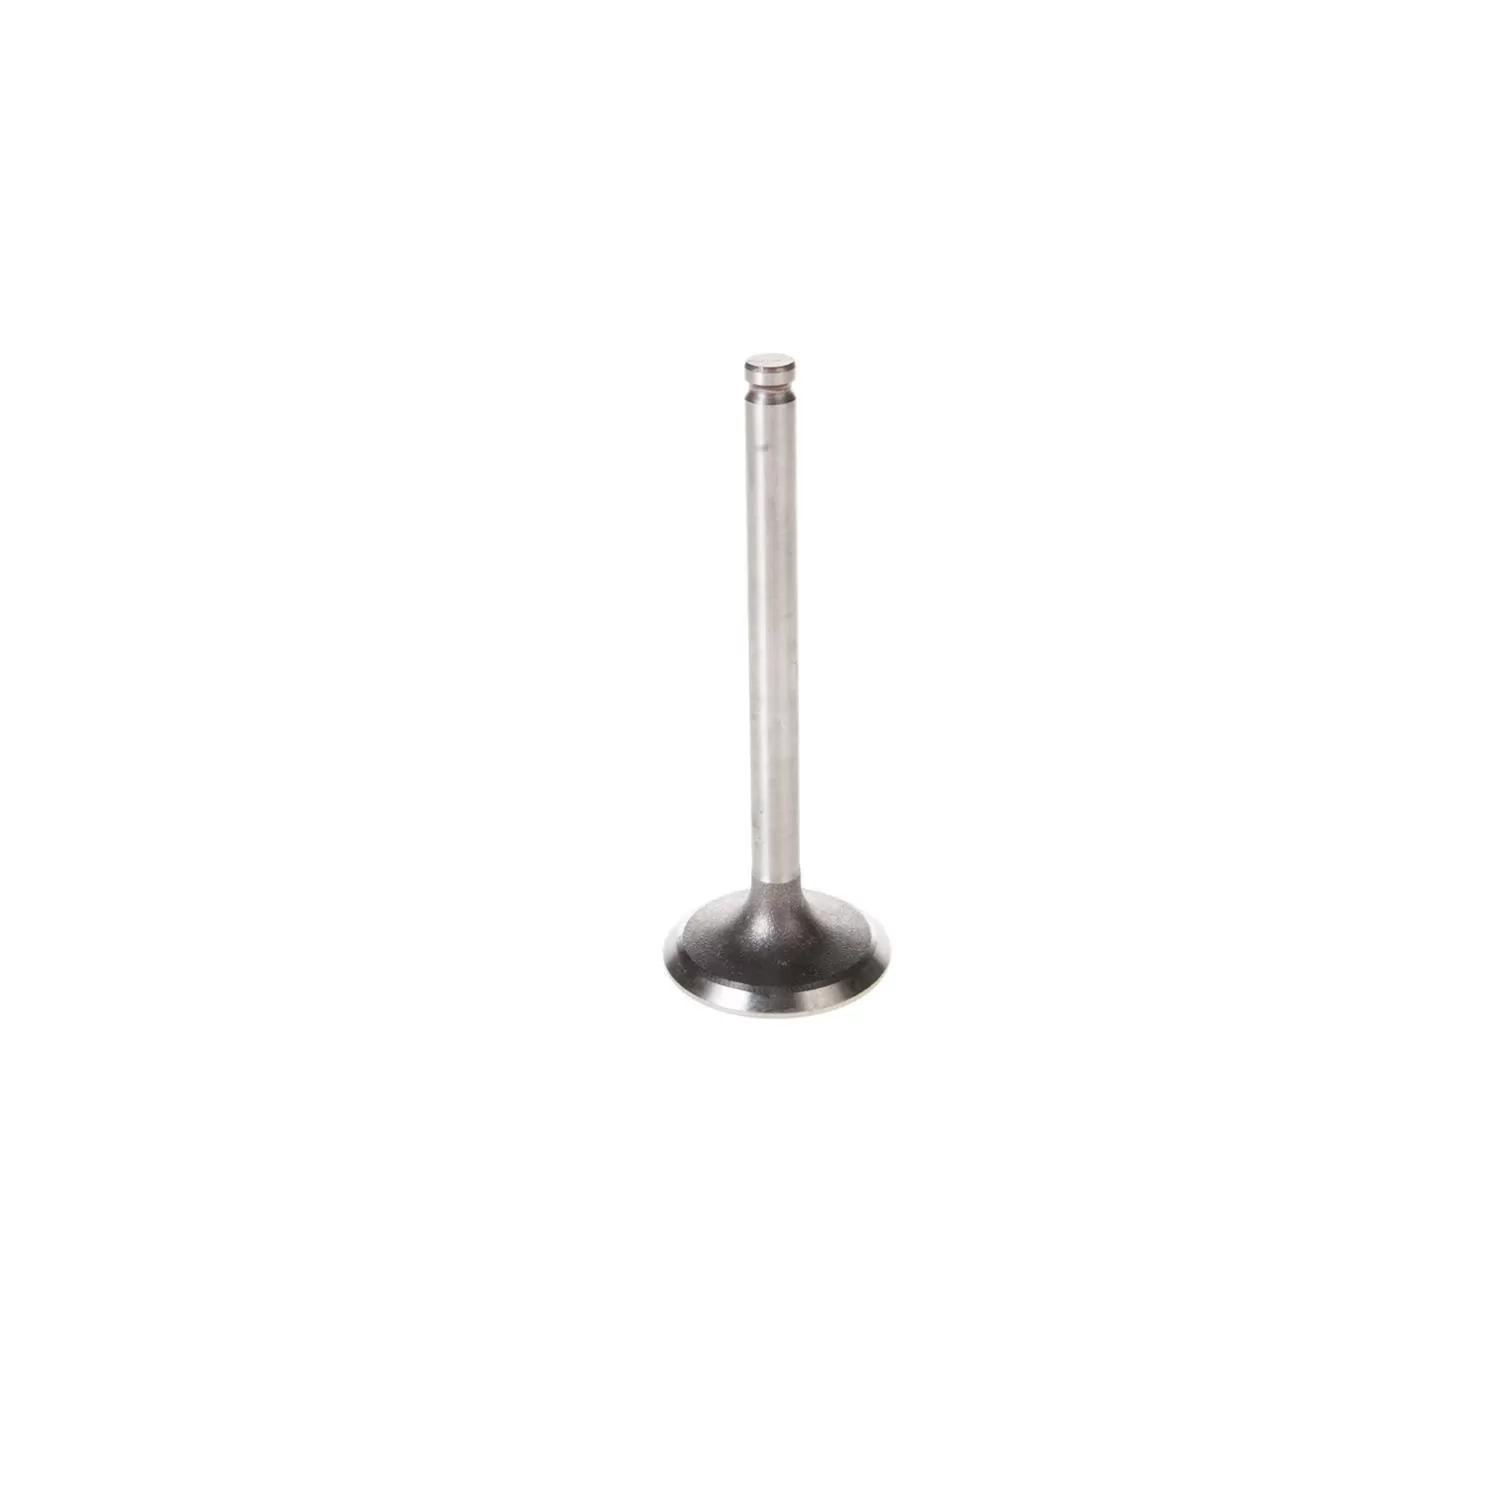 Melling Stock Replacement Intake Valve - V5127